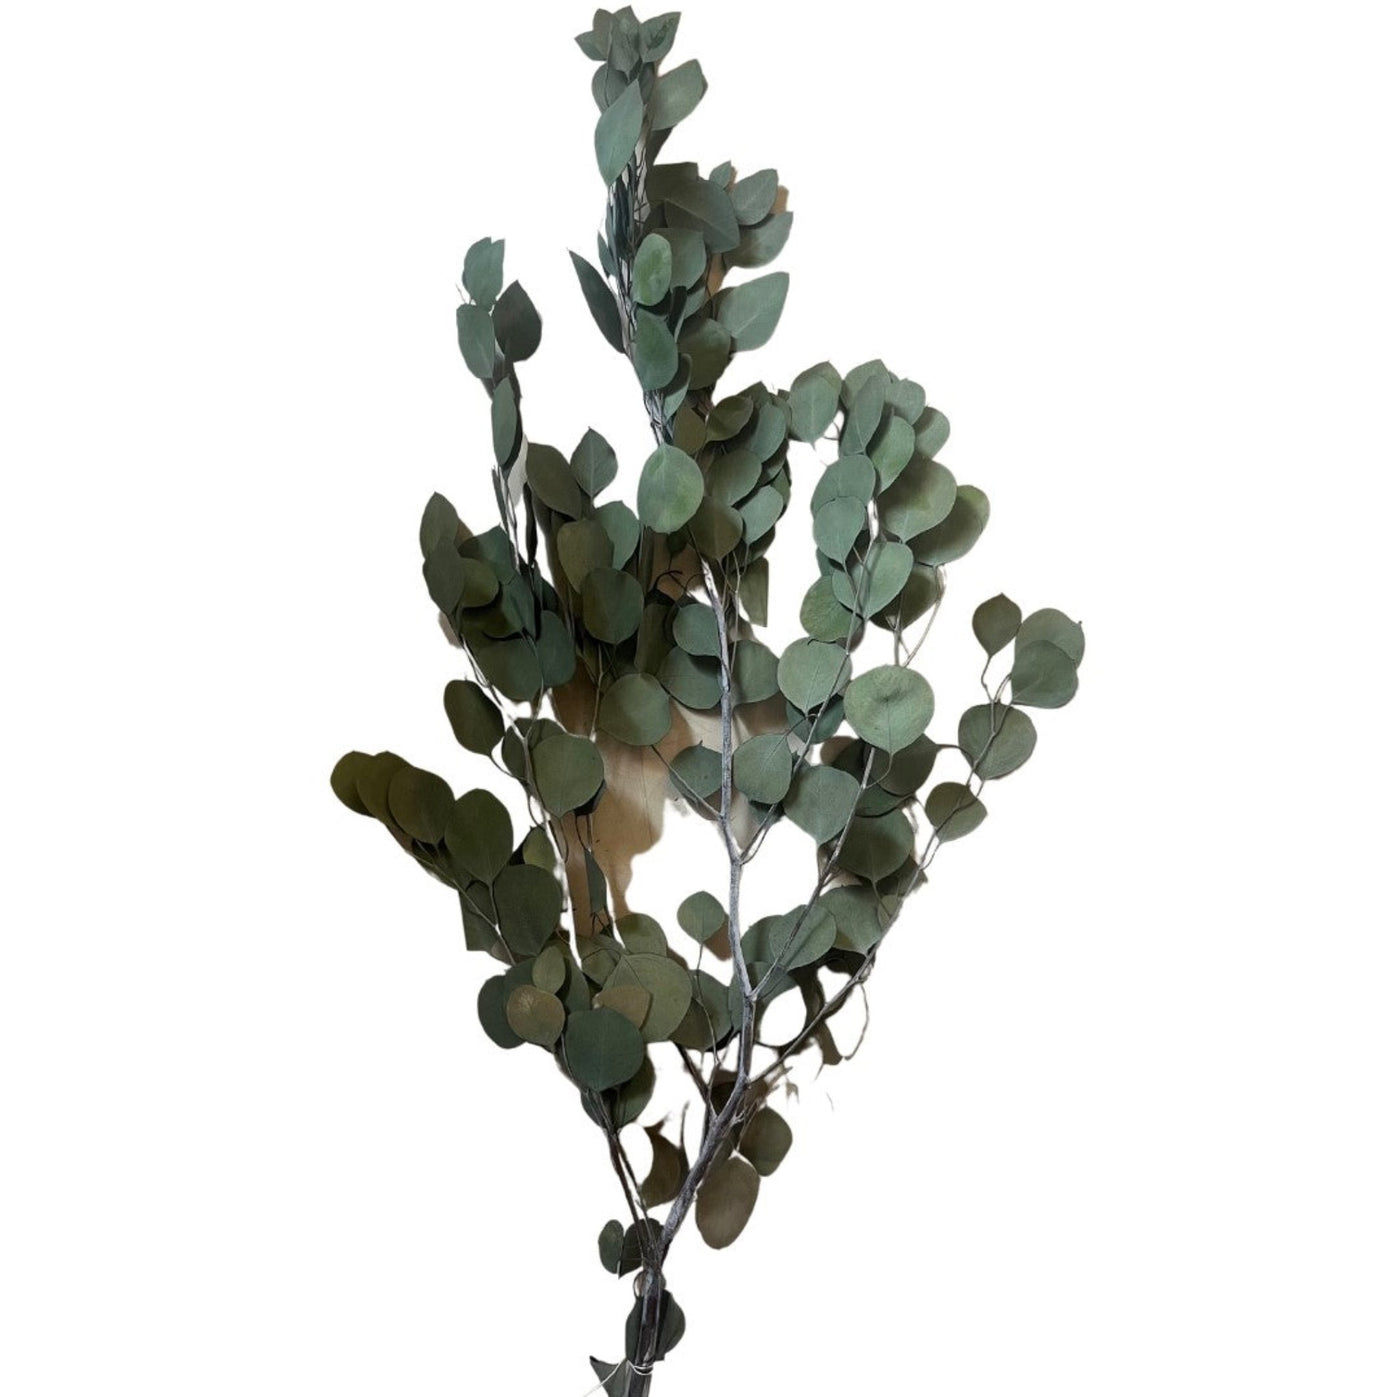 Silver Dollar Eucalyptus is natural and preserved. Perfect for floral arrangements, bouquets, events, and DIY décor.